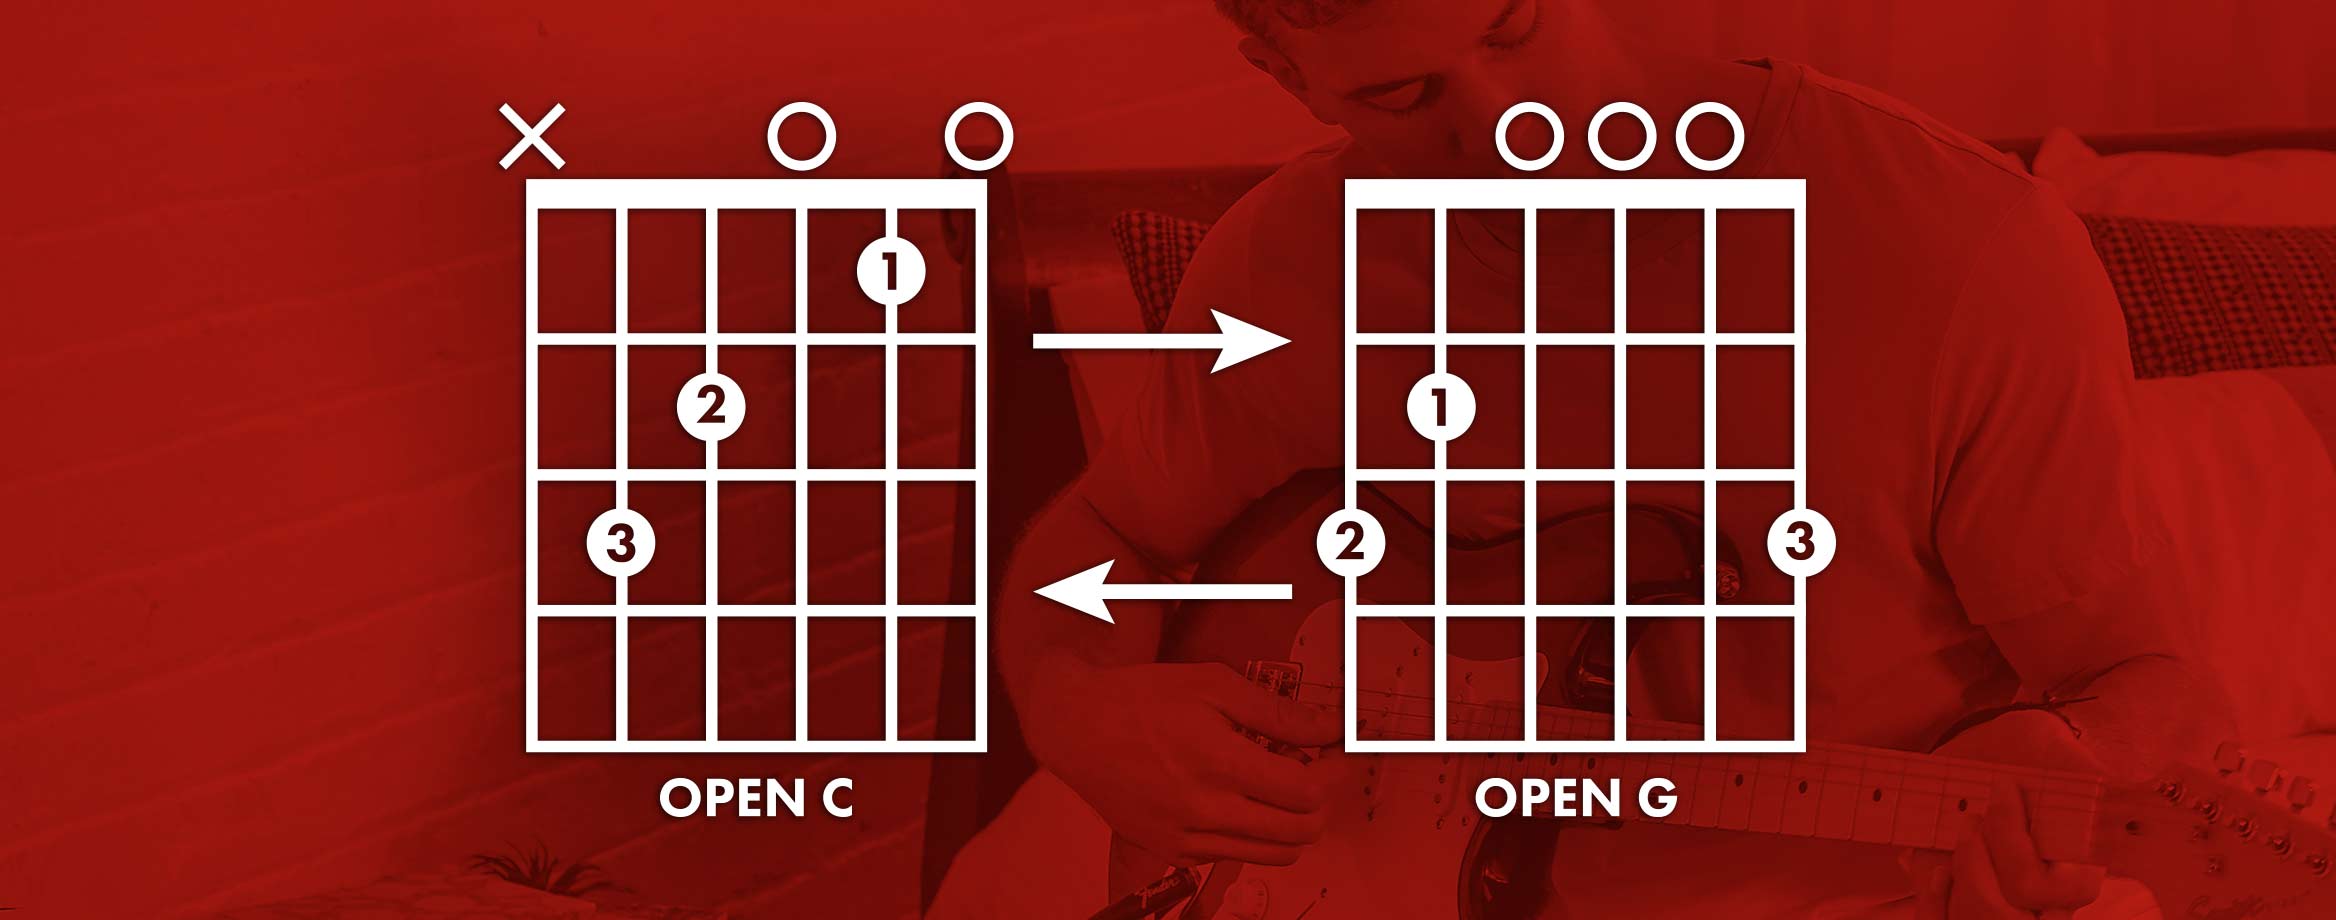 how-to-tips-for-guitar-chord-changes-chord-transitions-fender-guitars